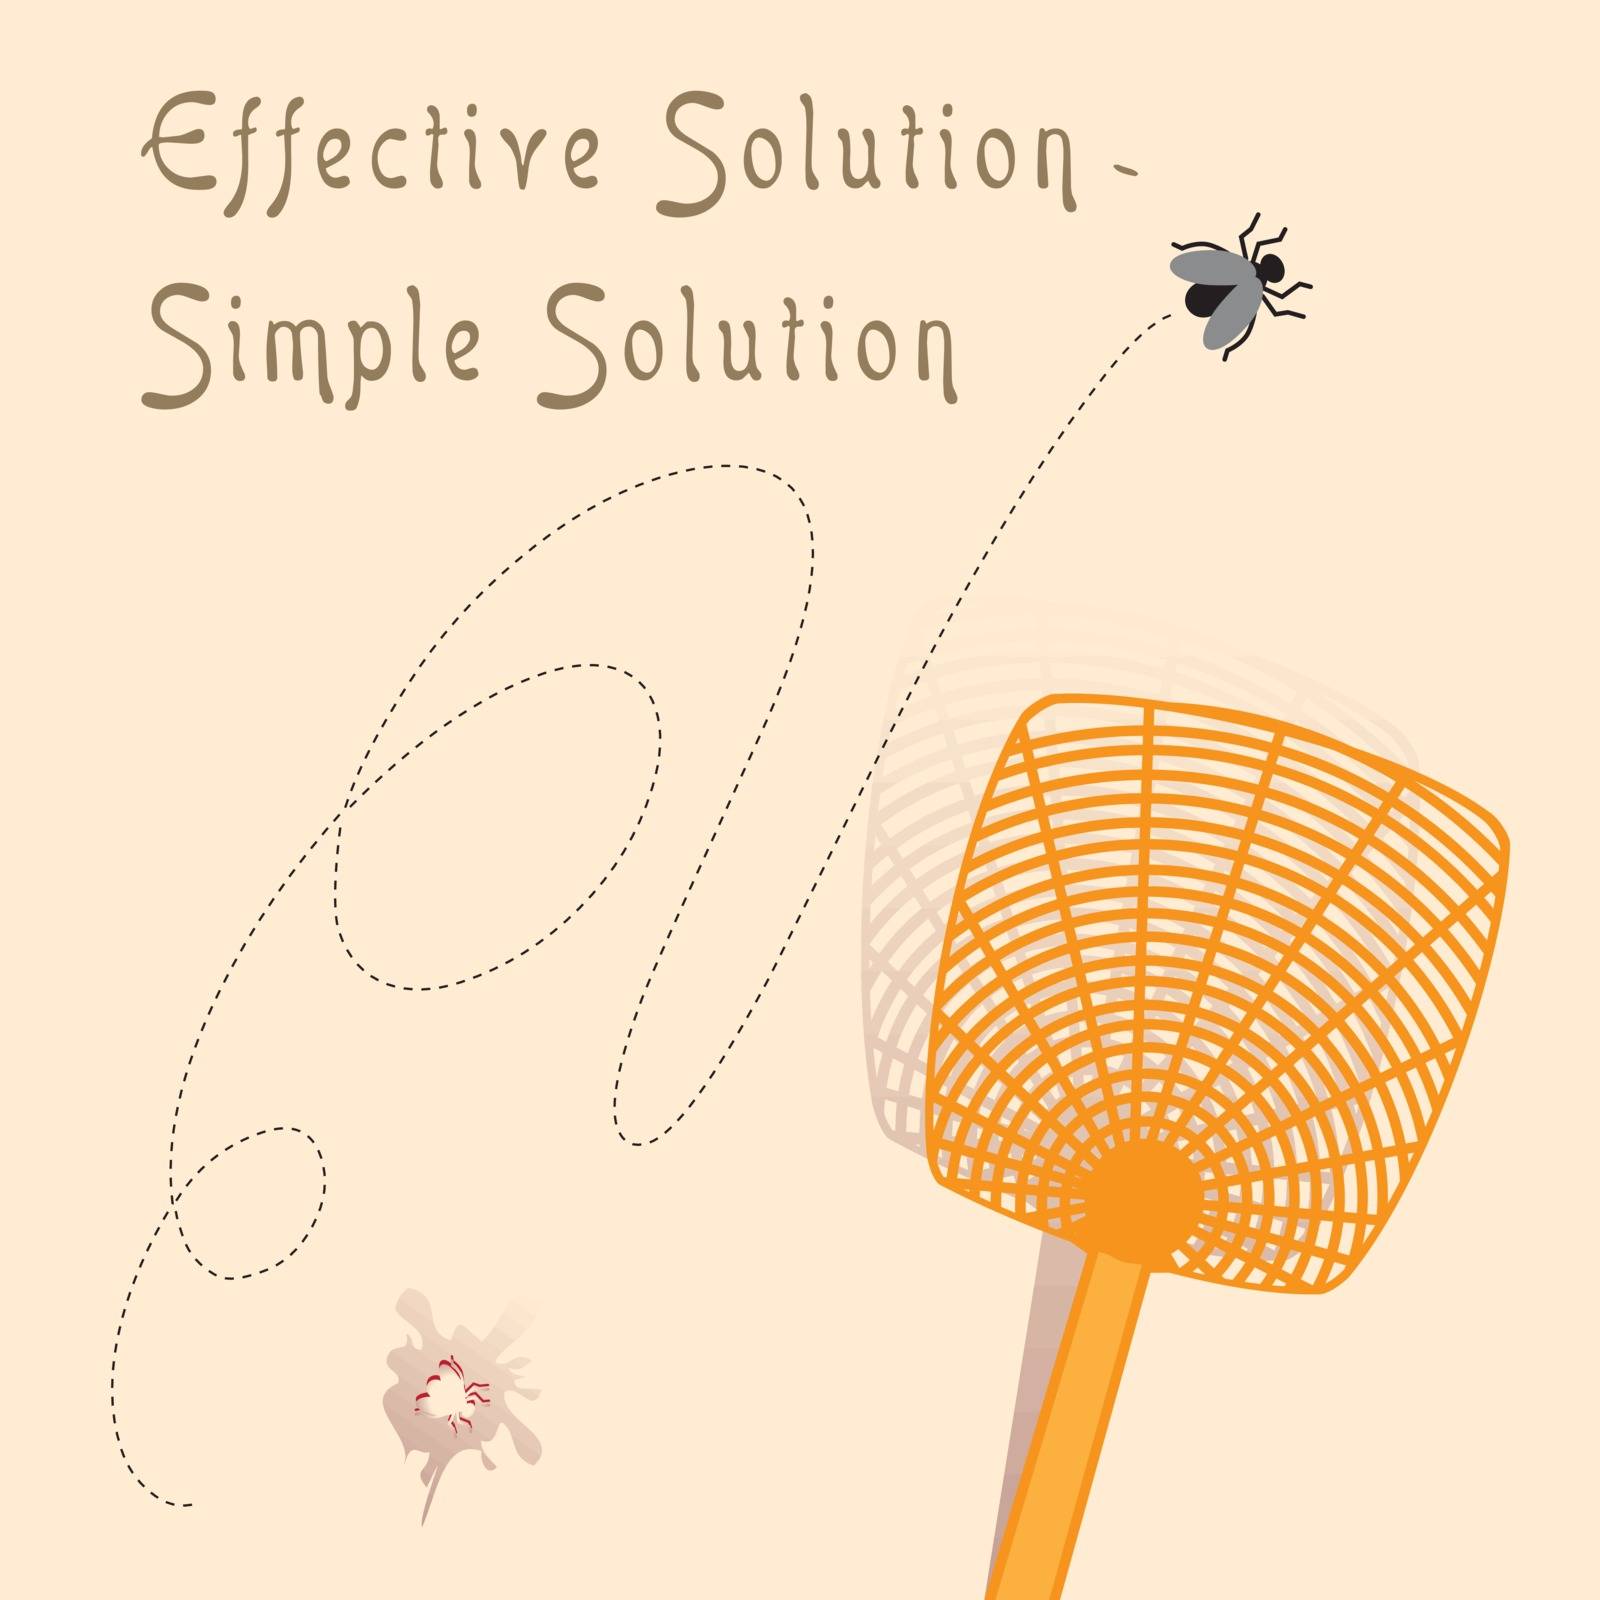 Effective solution - simple solution by VIPDesignUSA